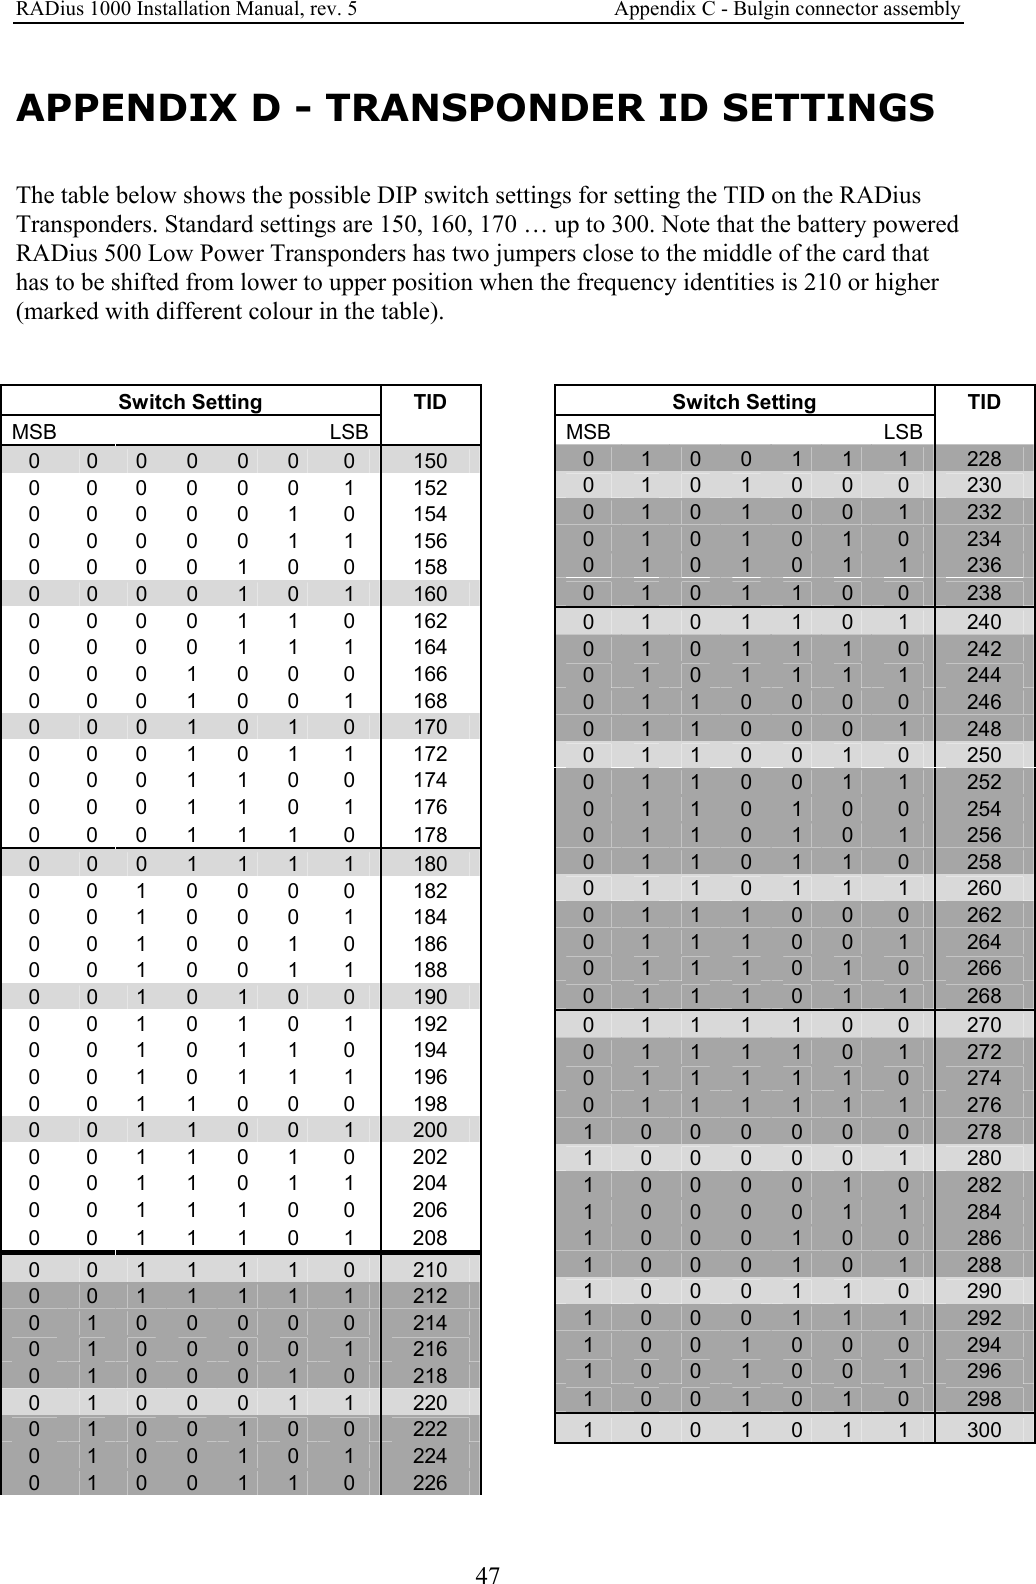 RADius 1000 Installation Manual, rev. 5    Appendix C - Bulgin connector assembly 47 APPENDIX D - TRANSPONDER ID SETTINGS The table below shows the possible DIP switch settings for setting the TID on the RADius Transponders. Standard settings are 150, 160, 170 … up to 300. Note that the battery powered RADius 500 Low Power Transponders has two jumpers close to the middle of the card that has to be shifted from lower to upper position when the frequency identities is 210 or higher (marked with different colour in the table).   Switch Setting  TID MSB                 LSB   0  0  0  0  0  0  0  150 0  0 0 0 0 0  1  152 0  0 0 0 0 1  0  154 0  0 0 0 0 1  1  156 0  0 0 0 1 0  0  158 0  0  0  0  1  0  1  160 0  0 0 0 1 1  0  162 0  0 0 0 1 1  1  164 0  0 0 1 0 0  0  166 0  0 0 1 0 0  1  168 0  0  0  1  0  1  0  170 0  0 0 1 0 1  1  172 0  0 0 1 1 0  0  174 0  0 0 1 1 0  1  176 0  0 0 1 1 1  0  178 0  0  0  1  1  1  1  180 0  0 1 0 0 0  0  182 0  0 1 0 0 0  1  184 0  0 1 0 0 1  0  186 0  0 1 0 0 1  1  188 0  0  1  0  1  0  0  190 0  0 1 0 1 0  1  192 0  0 1 0 1 1  0  194 0  0 1 0 1 1  1  196 0  0 1 1 0 0  0  198 0  0  1  1  0  0  1  200 0  0 1 1 0 1  0  202 0  0 1 1 0 1  1  204 0  0 1 1 1 0  0  206 0  0 1 1 1 0  1  208 0  0  1  1  1  1  0  210 0  0  1  1  1  1  1  212 0  1  0  0  0  0  0  214 0  1  0  0  0  0  1  216 0  1  0  0  0  1  0  218 0  1  0  0  0  1  1  220 0  1  0  0  1  0  0  222 0  1  0  0  1  0  1  224 0  1  0  0  1  1  0  226 Switch Setting  TID MSB                LSB  0  1  0  0  1  1  1  228 0  1  0  1  0  0  0  230 0  1  0  1  0  0  1  232 0  1  0  1  0  1  0  234 0  1  0  1  0  1  1  236 0  1  0  1  1  0  0  238 0  1  0  1  1  0  1  240 0  1  0  1  1  1  0  242 0  1  0  1  1  1  1  244 0  1  1  0  0  0  0  246 0  1  1  0  0  0  1  248 0  1  1  0  0  1  0  250 0  1  1  0  0  1  1  252 0  1  1  0  1  0  0  254 0  1  1  0  1  0  1  256 0  1  1  0  1  1  0  258 0  1  1  0  1  1  1  260 0  1  1  1  0  0  0  262 0  1  1  1  0  0  1  264 0  1  1  1  0  1  0  266 0  1  1  1  0  1  1  268 0  1  1  1  1  0  0  270 0  1  1  1  1  0  1  272 0  1  1  1  1  1  0  274 0  1  1  1  1  1  1  276 1  0  0  0  0  0  0  278 1  0  0  0  0  0  1  280 1  0  0  0  0  1  0  282 1  0  0  0  0  1  1  284 1  0  0  0  1  0  0  286 1  0  0  0  1  0  1  288 1  0  0  0  1  1  0  290 1  0  0  0  1  1  1  292 1  0  0  1  0  0  0  294 1  0  0  1  0  0  1  296 1  0  0  1  0  1  0  298 1  0  0  1  0  1  1  300 